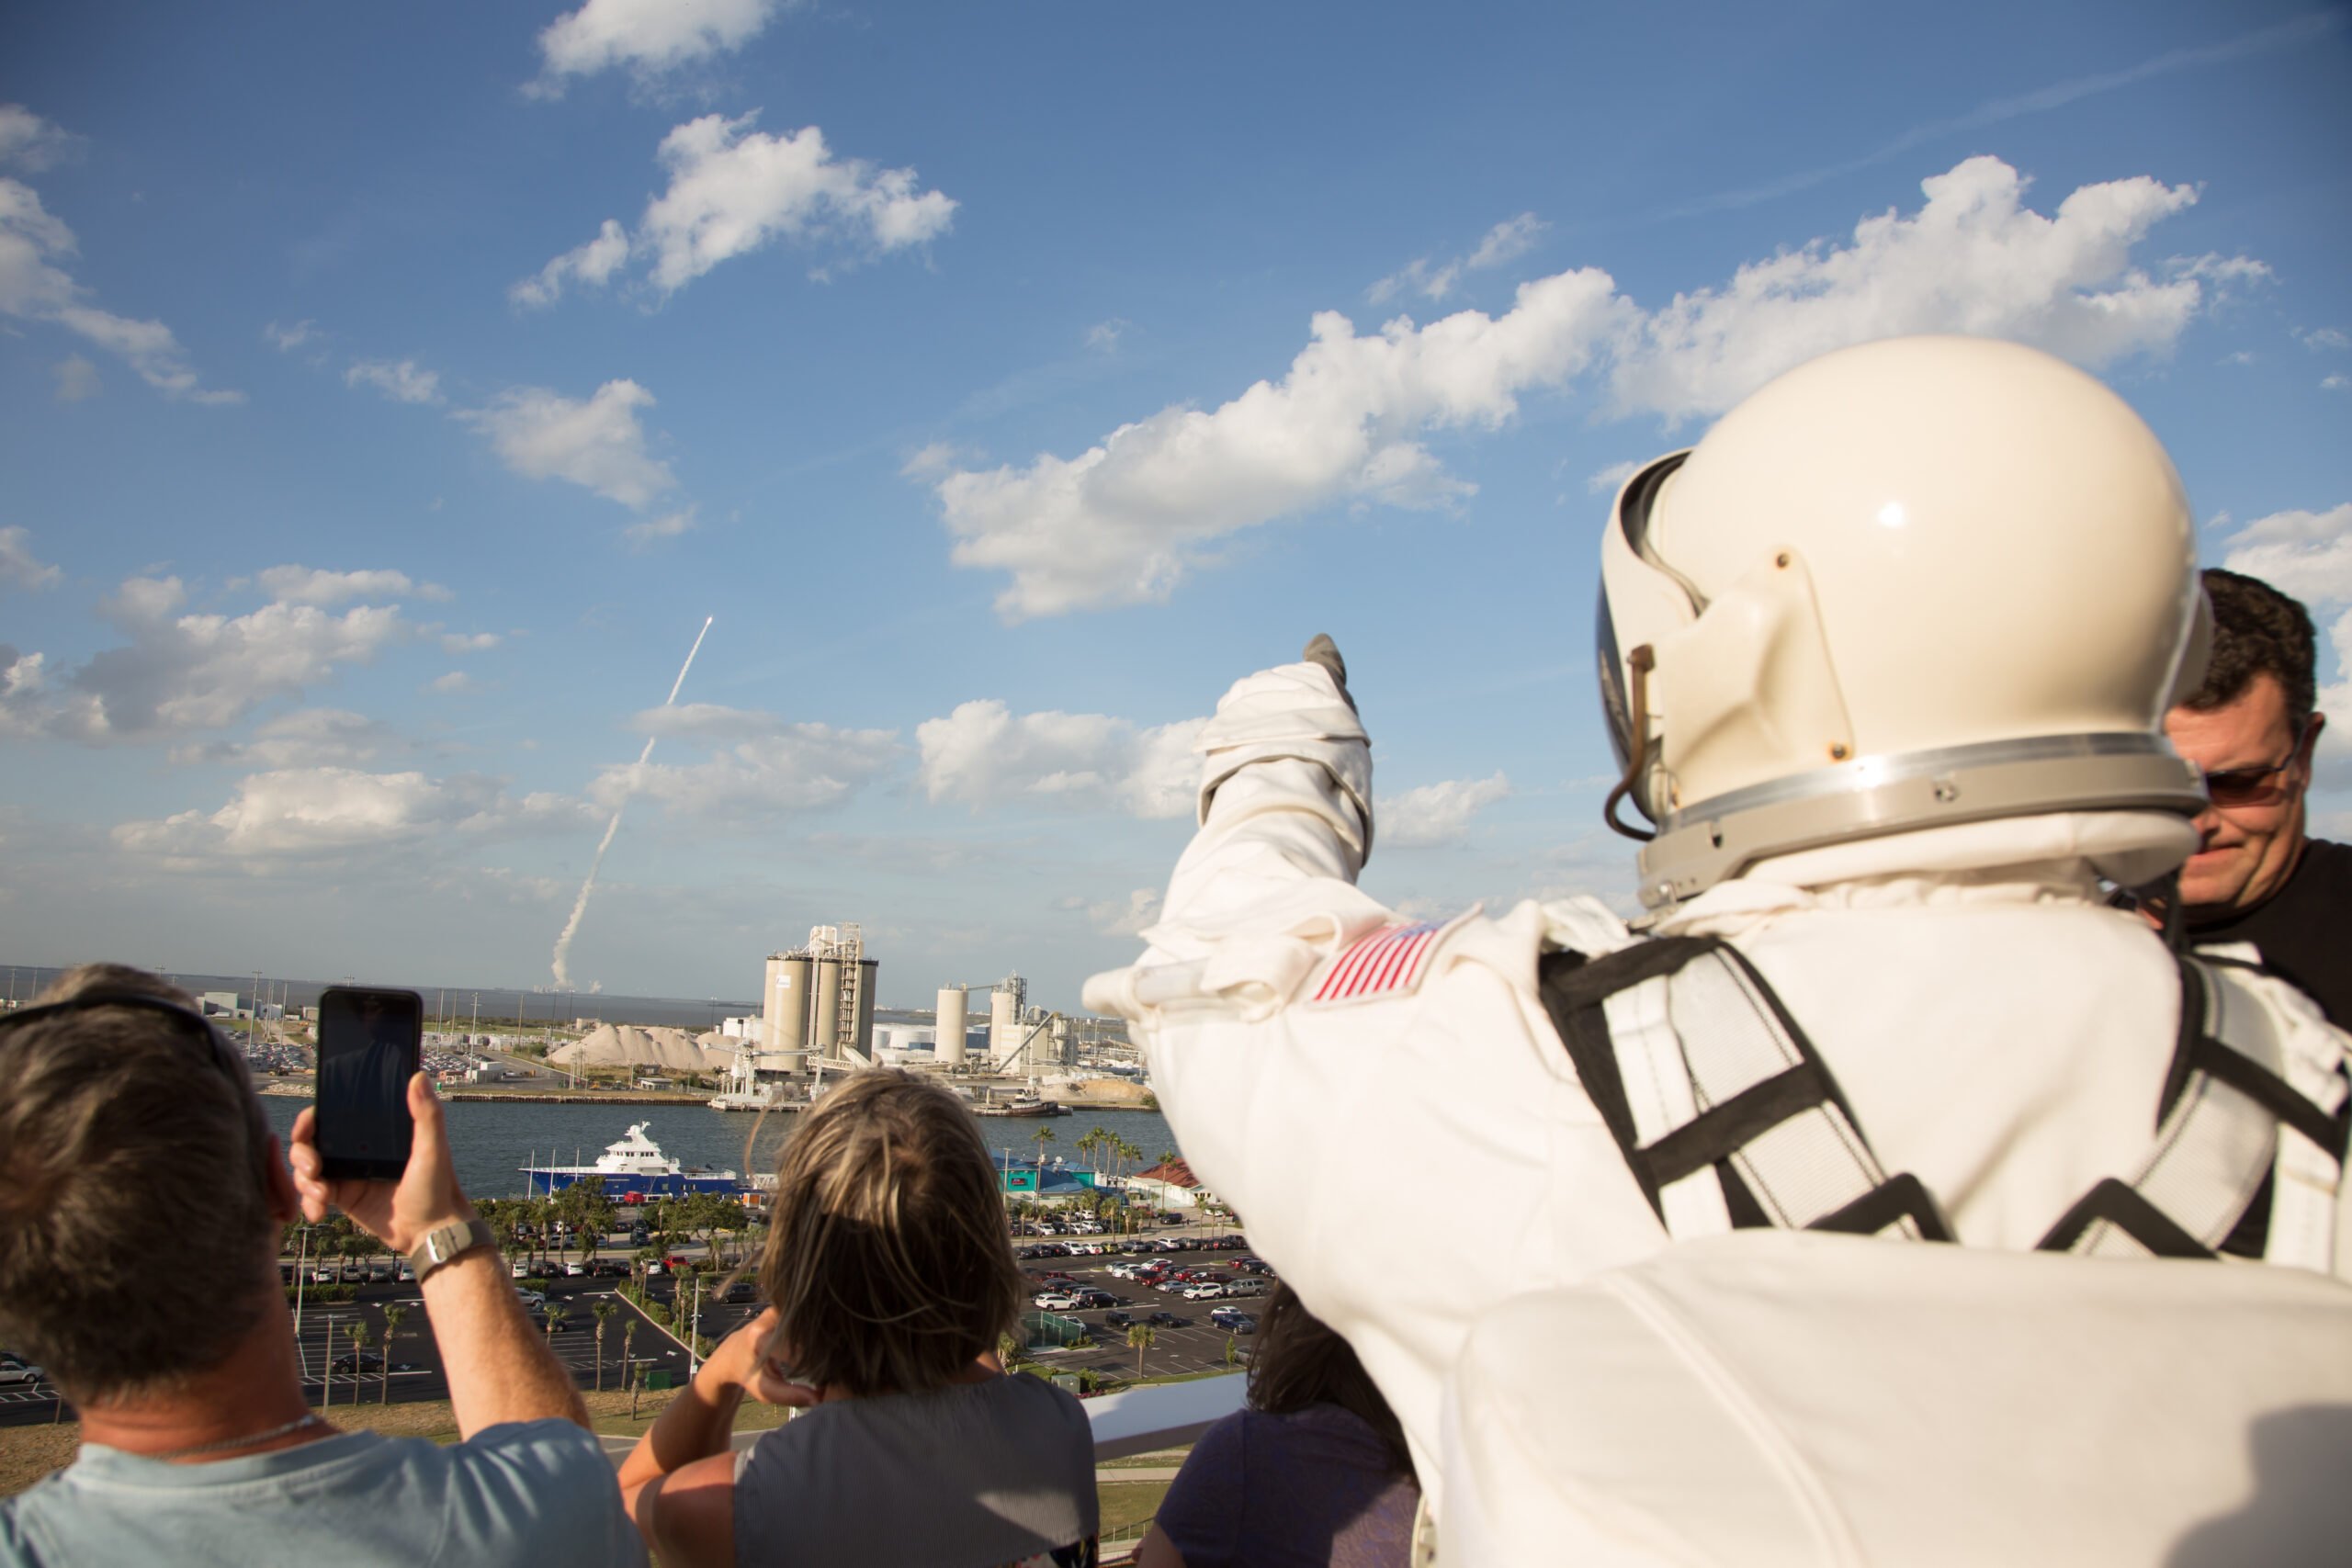 An astronaut watches a rocket launch from the viewing balcony at the Exploration Tower in Port Canaveral